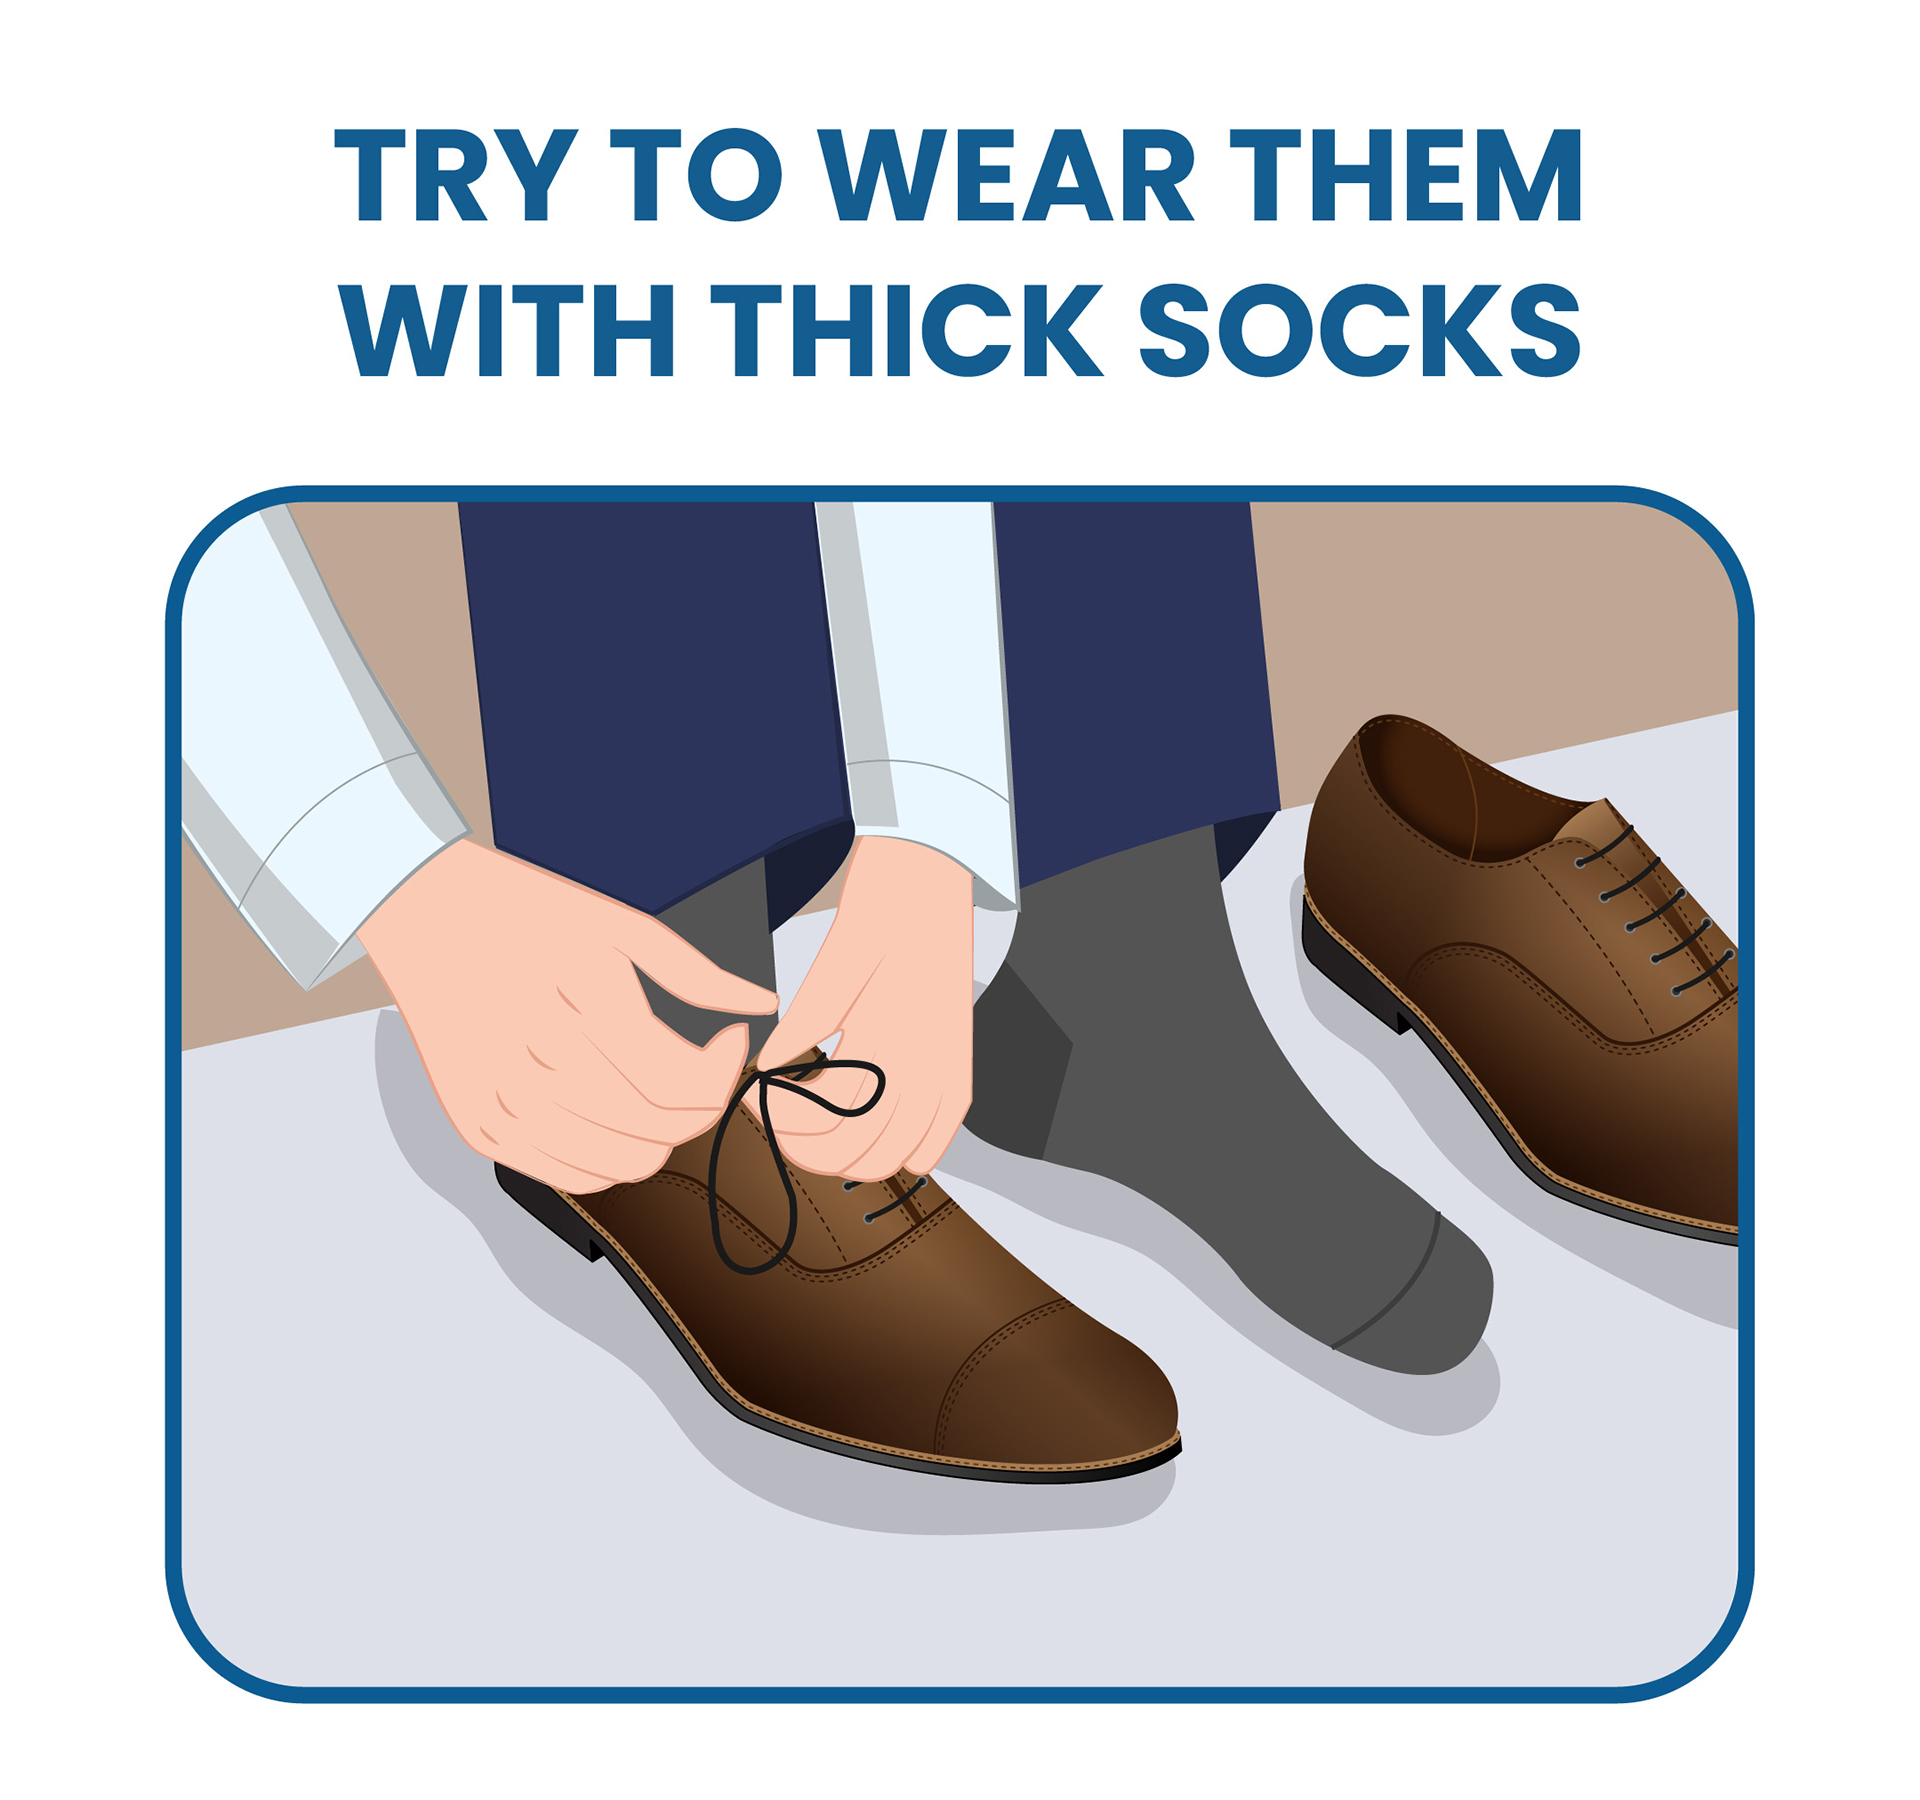 wearing thick socks with dress shoes